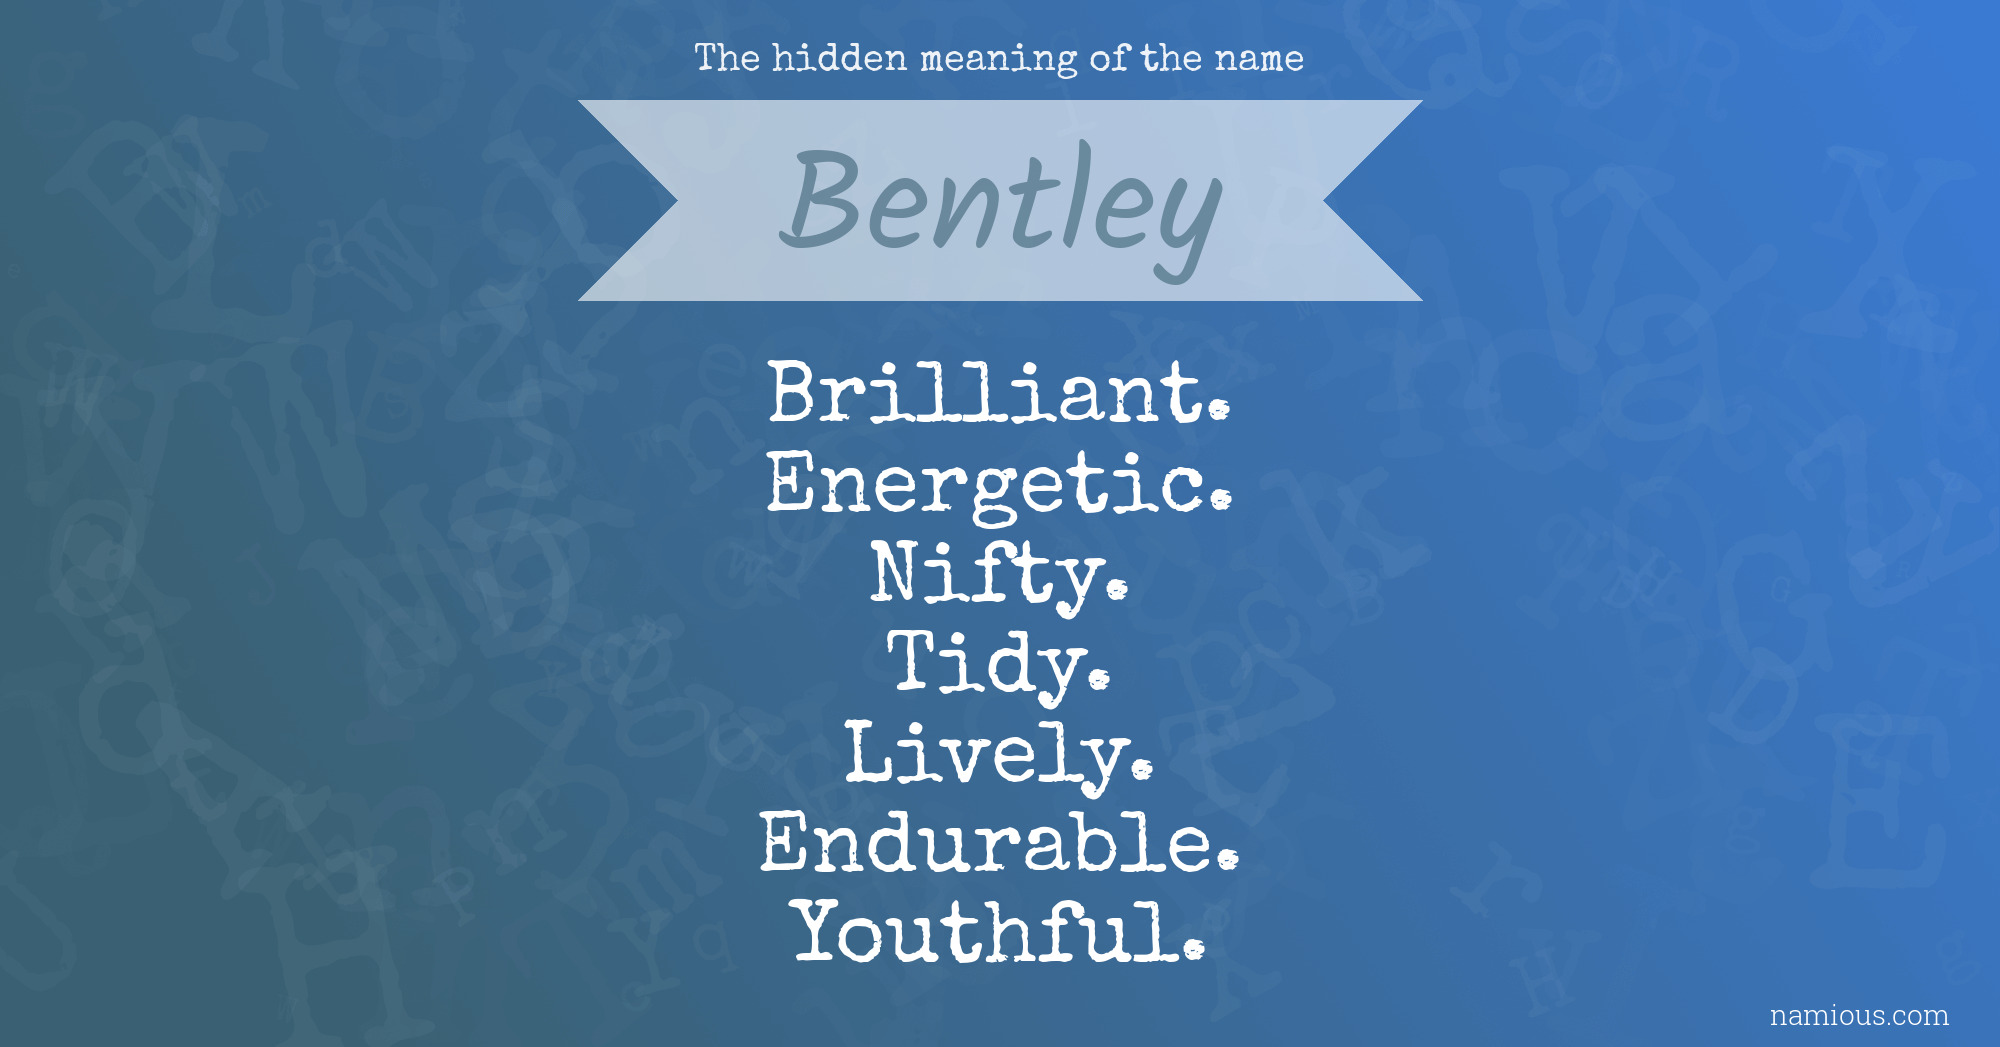 The hidden meaning of the name Bentley